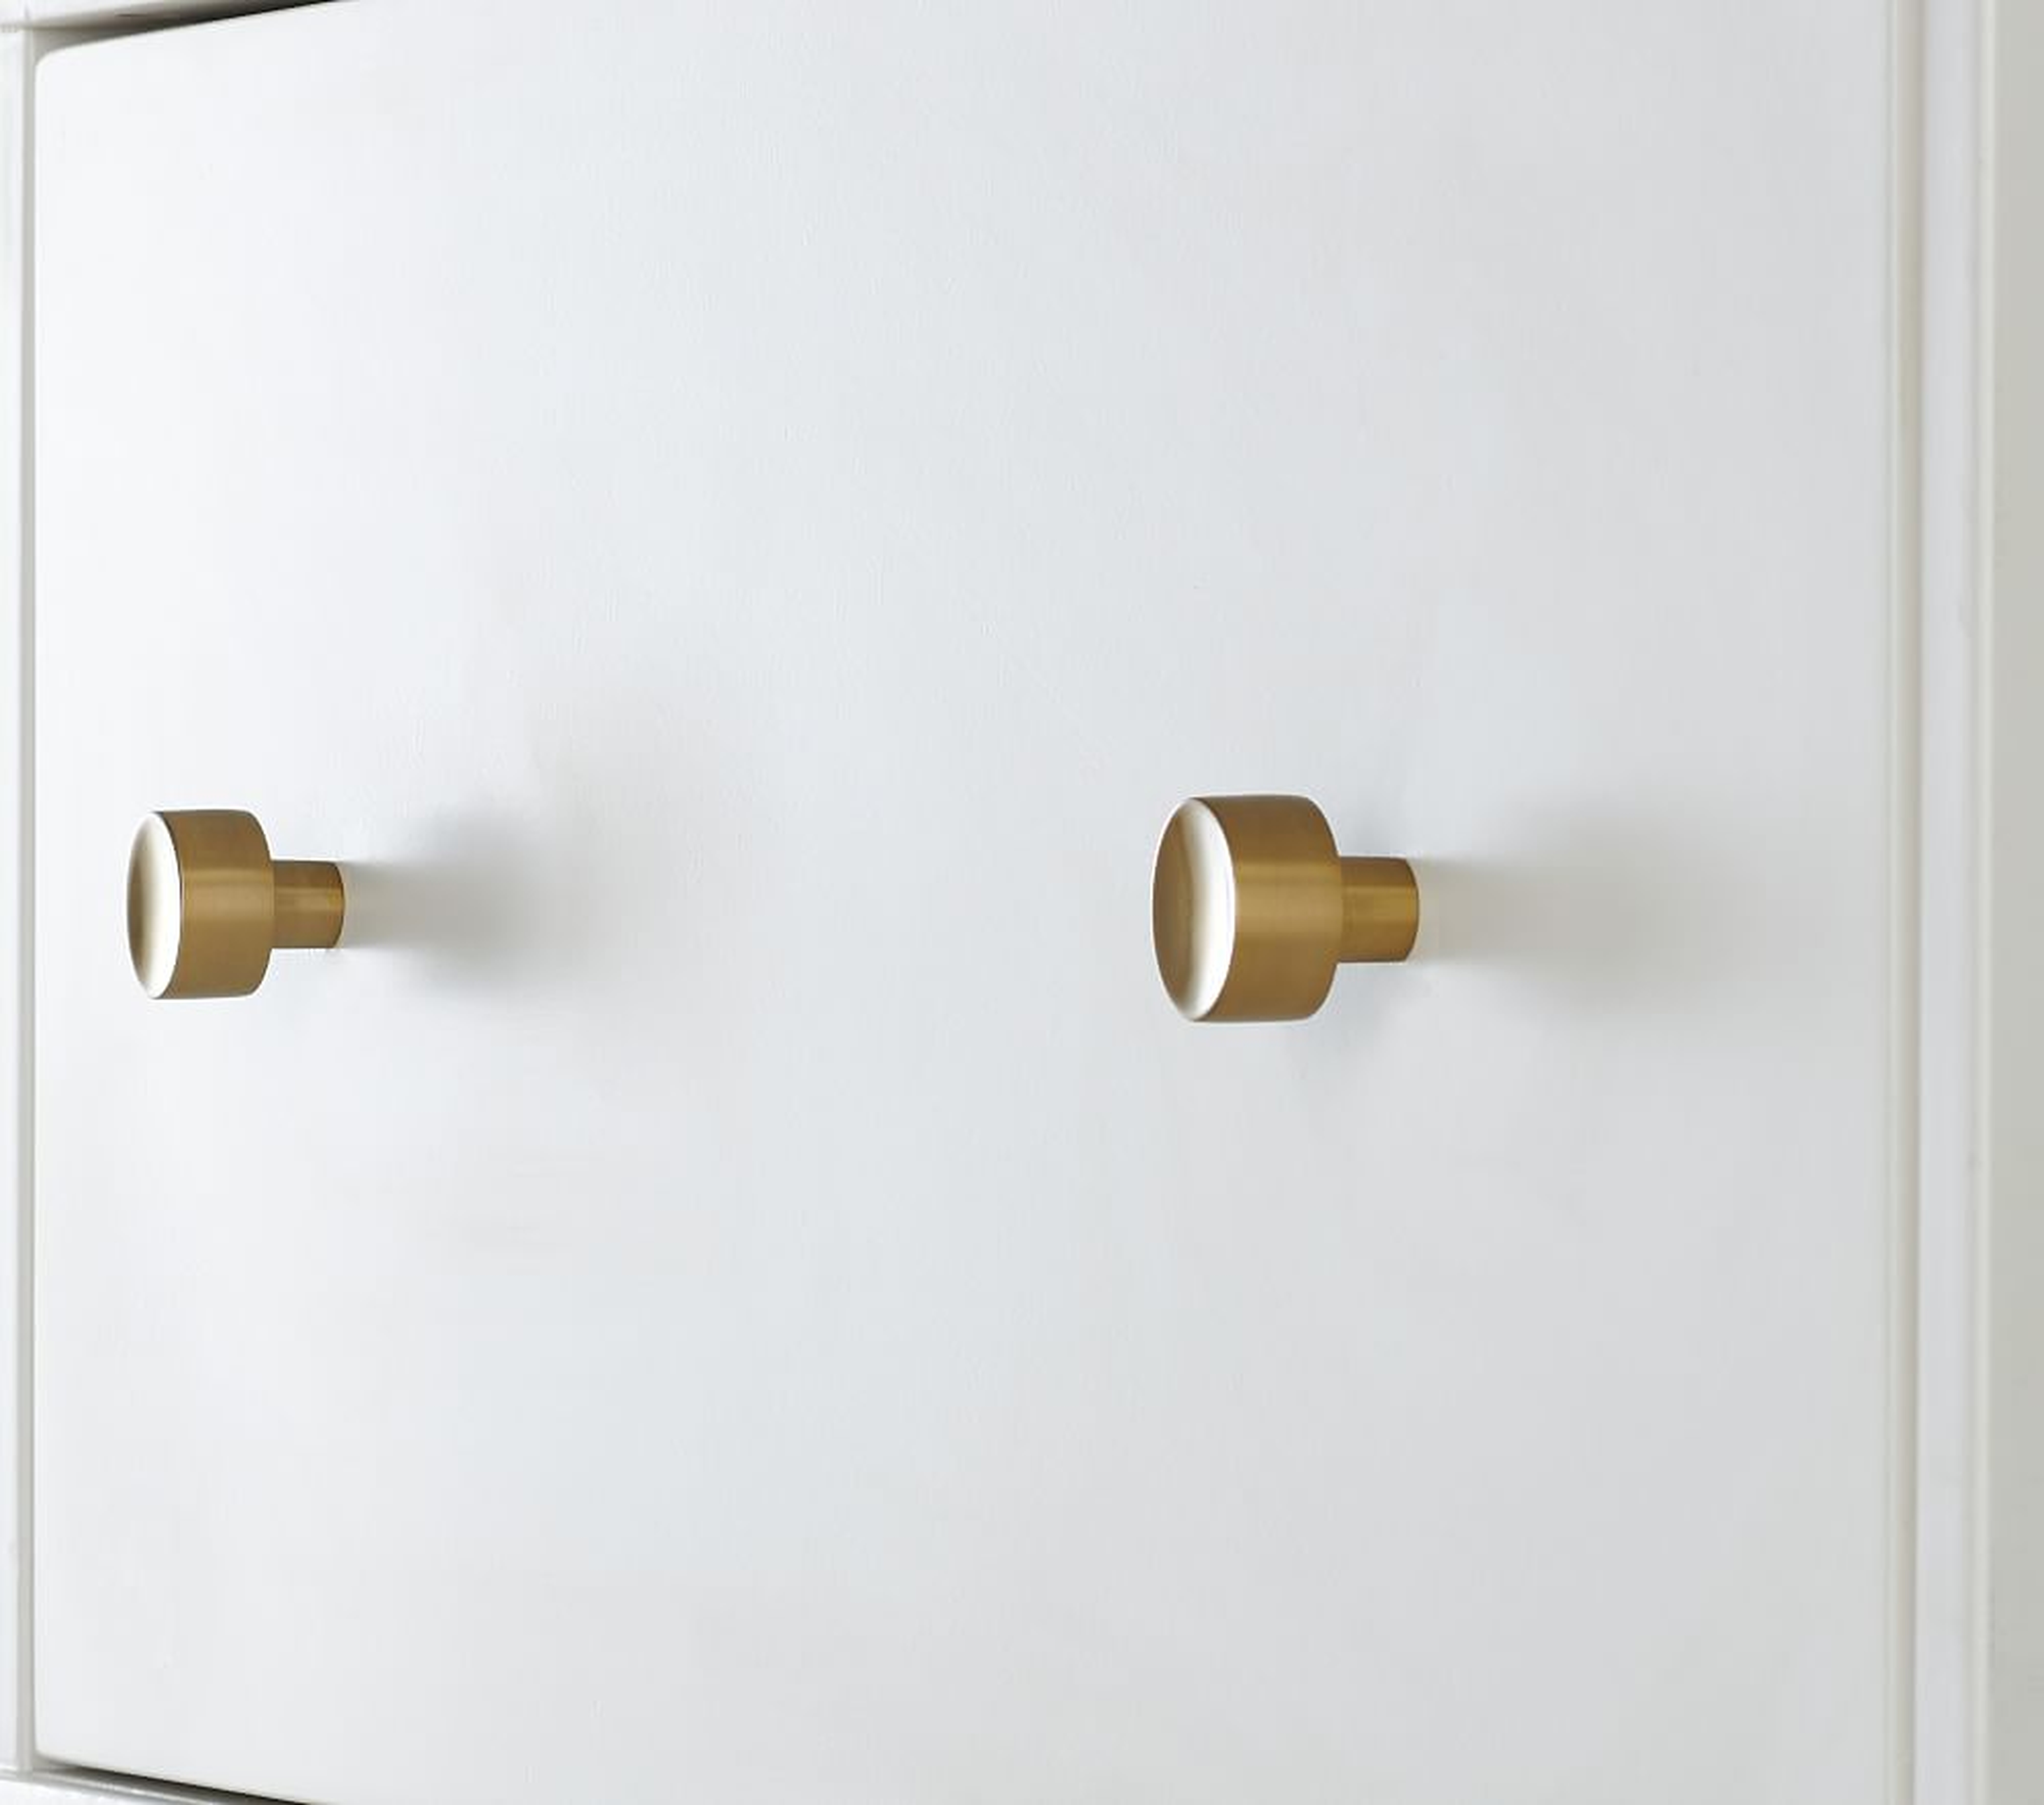 Cameron Wall System Traditional Cabinet Hardware, Brass, UPS - Pottery Barn Kids